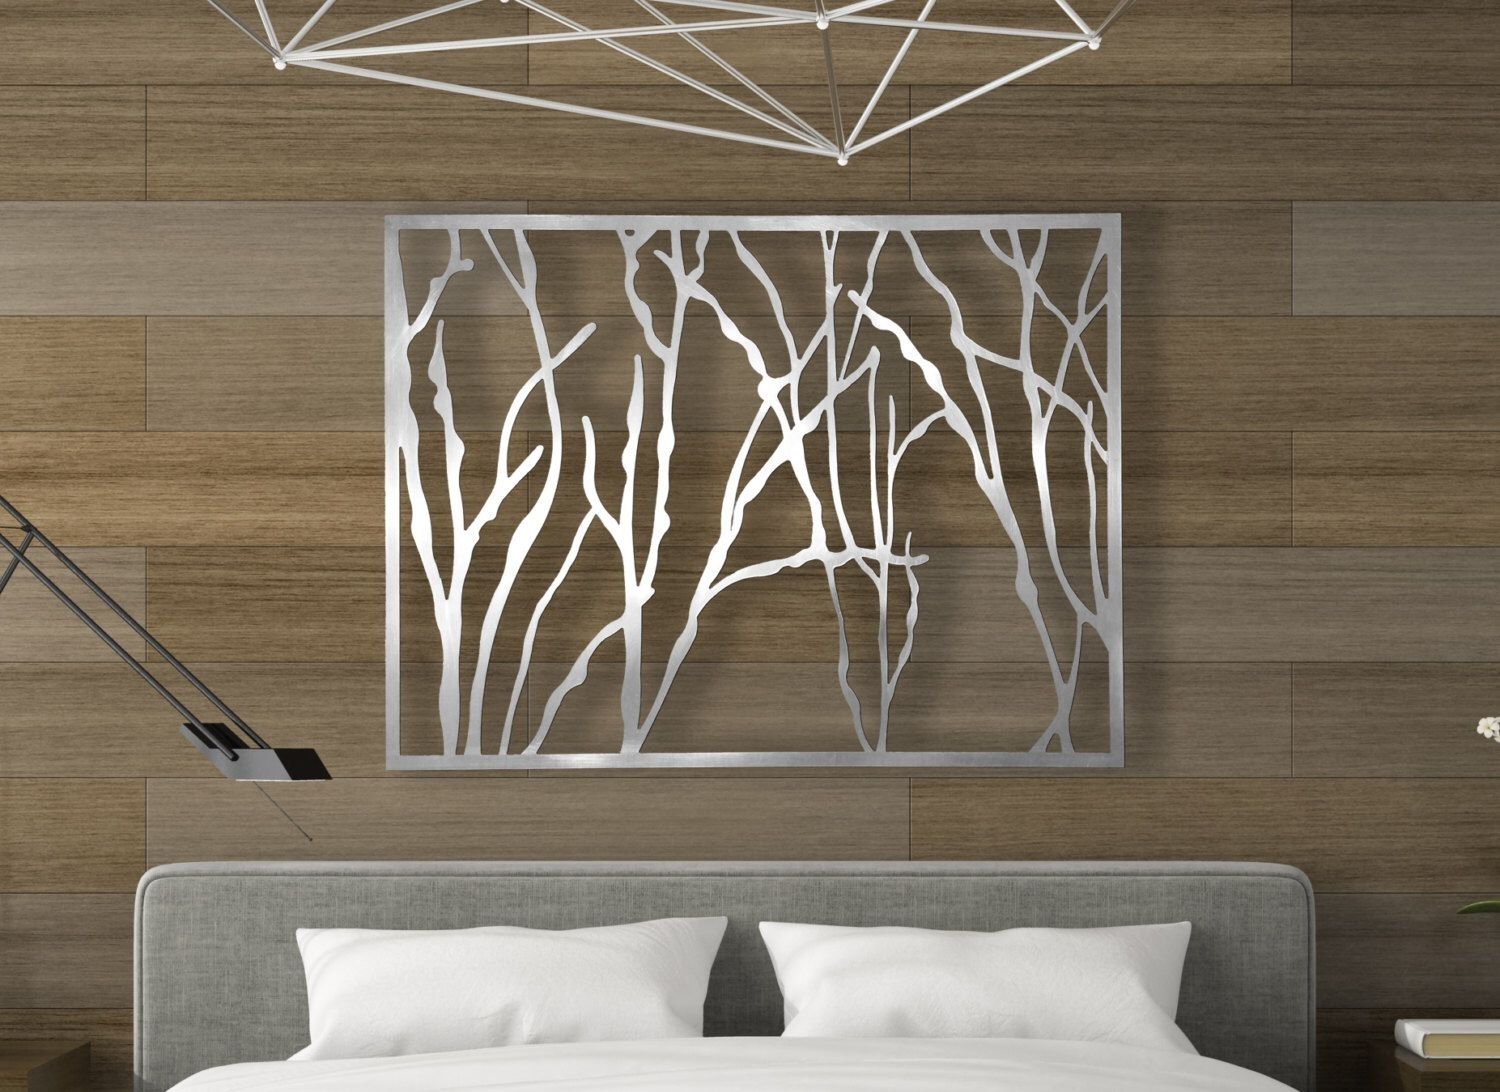 Laser Cut Metal Decorative Wall Art Panel Sculpture For Home, Office In Decorative Wall Art (View 8 of 20)